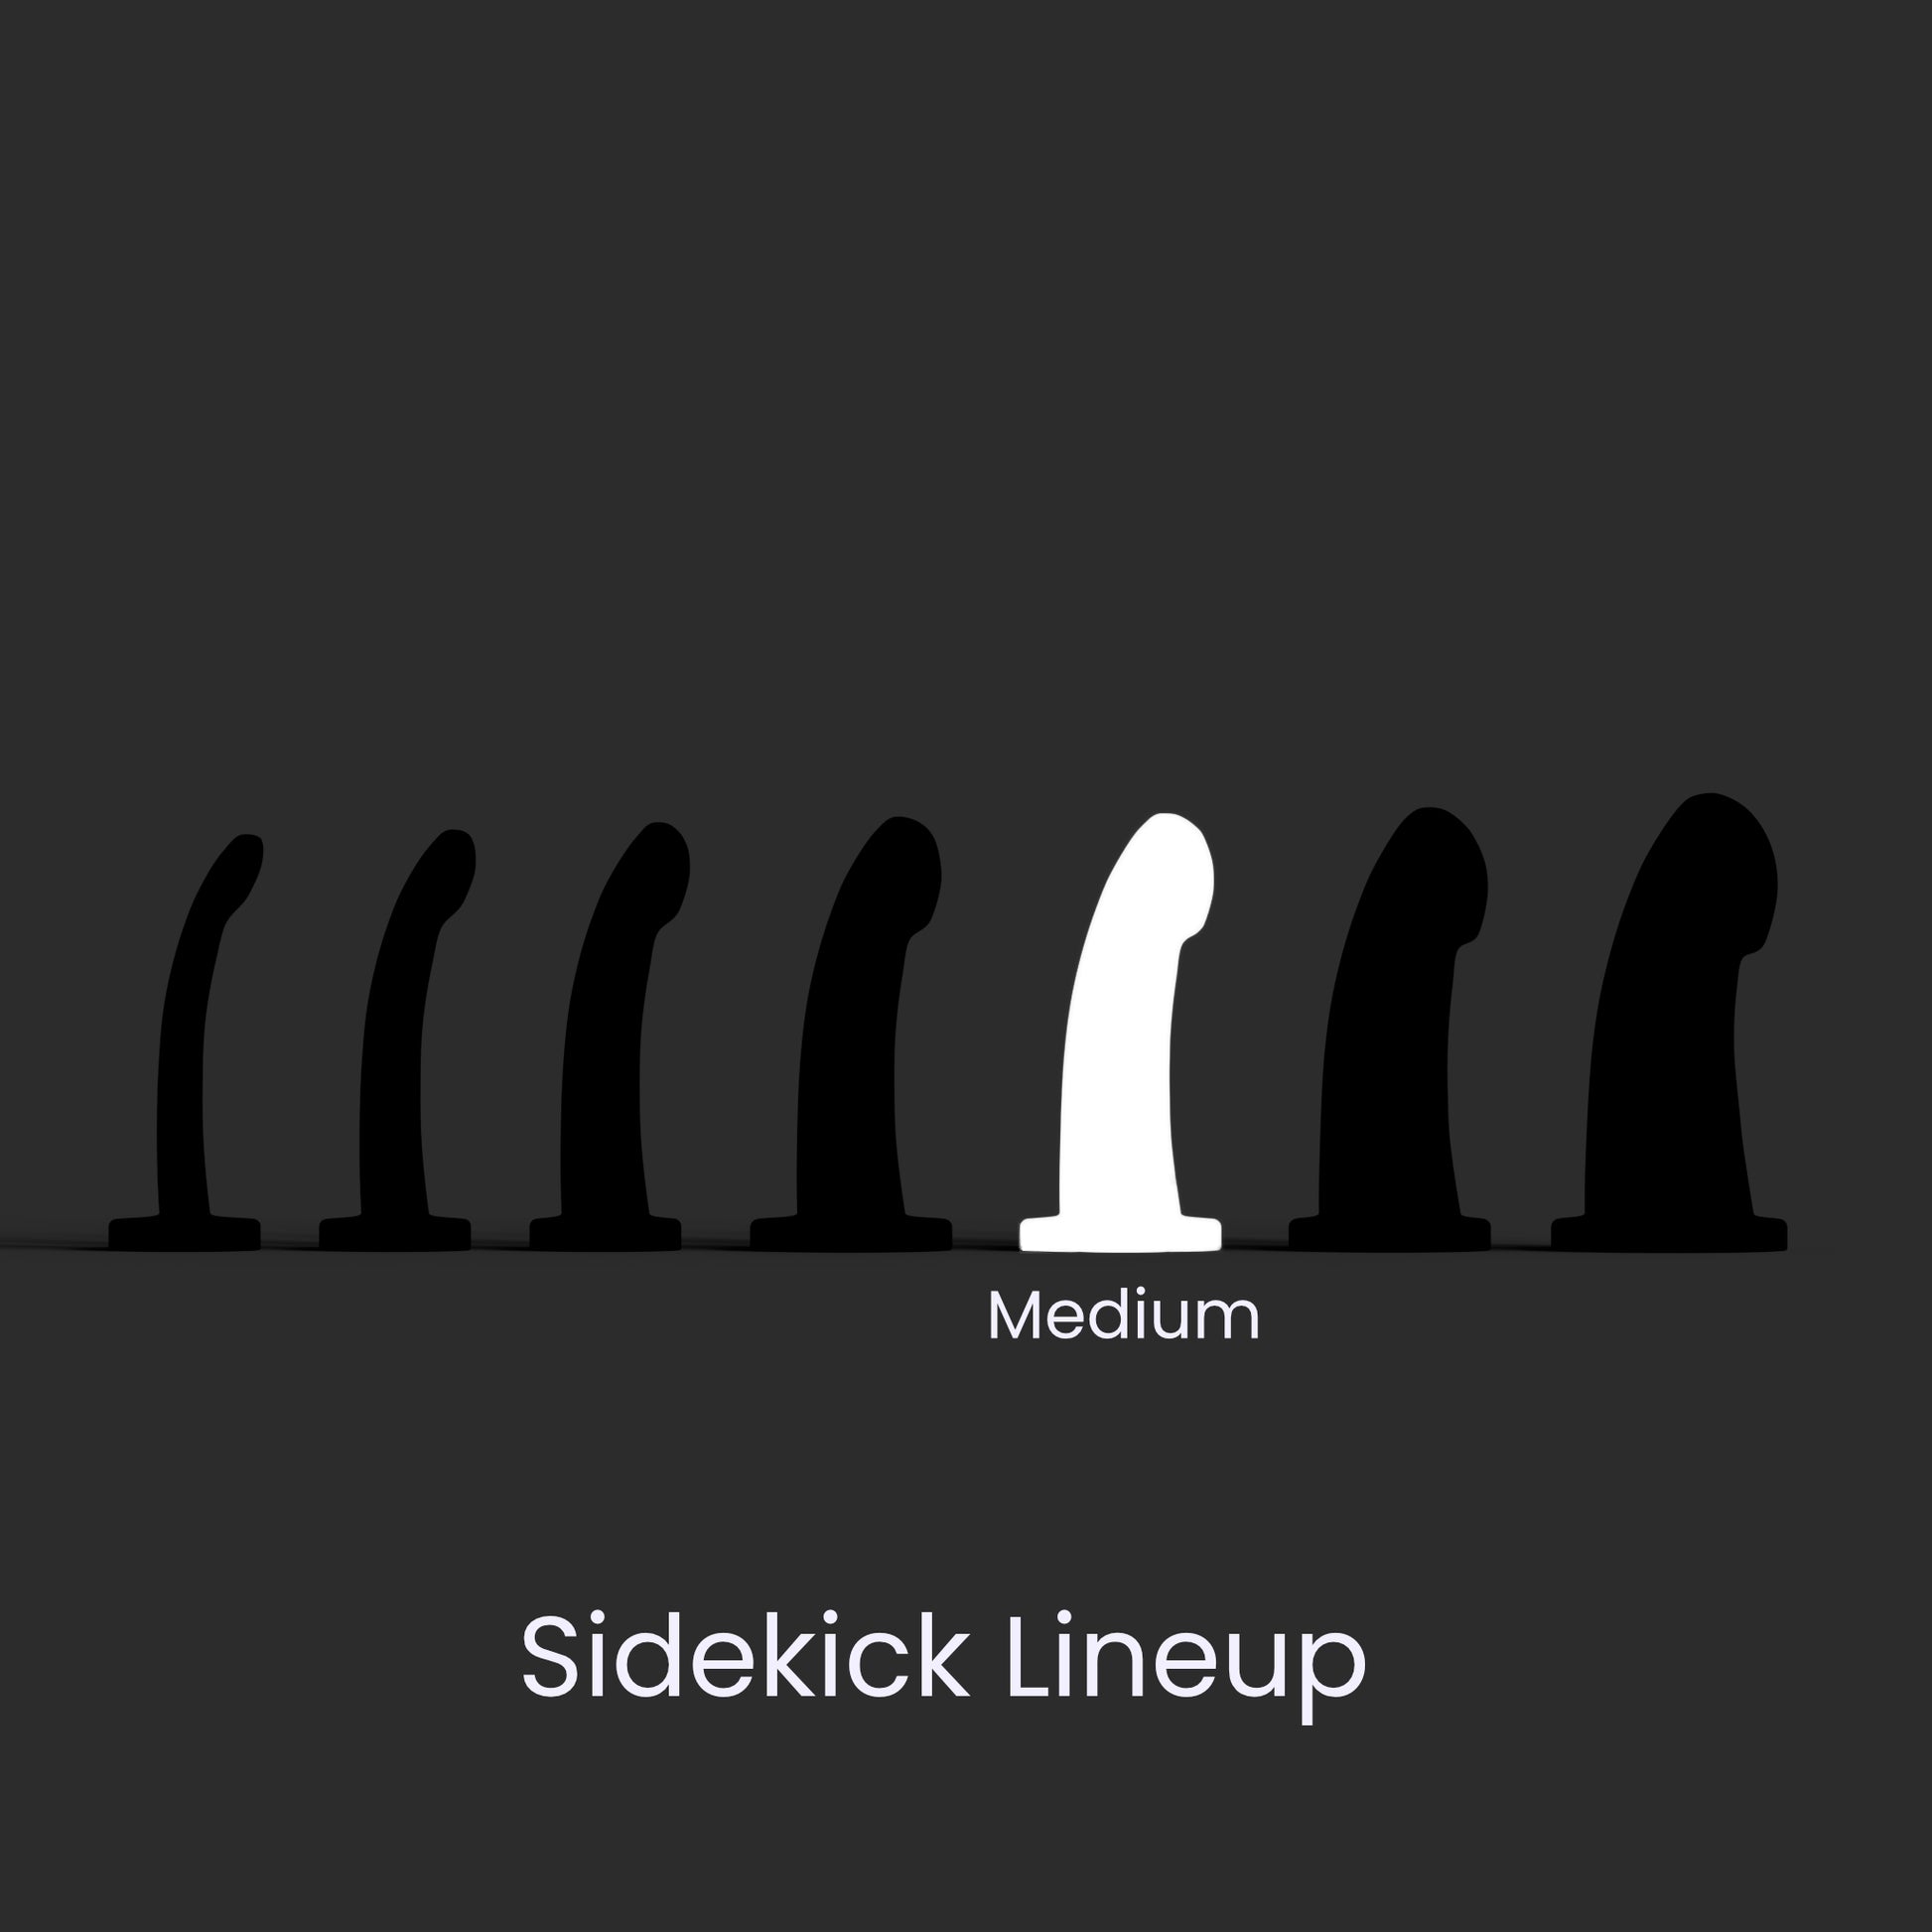 Diagram showing the seven Sidekick models lined up left to right smallest to largest, and the Medium in the fifth position.